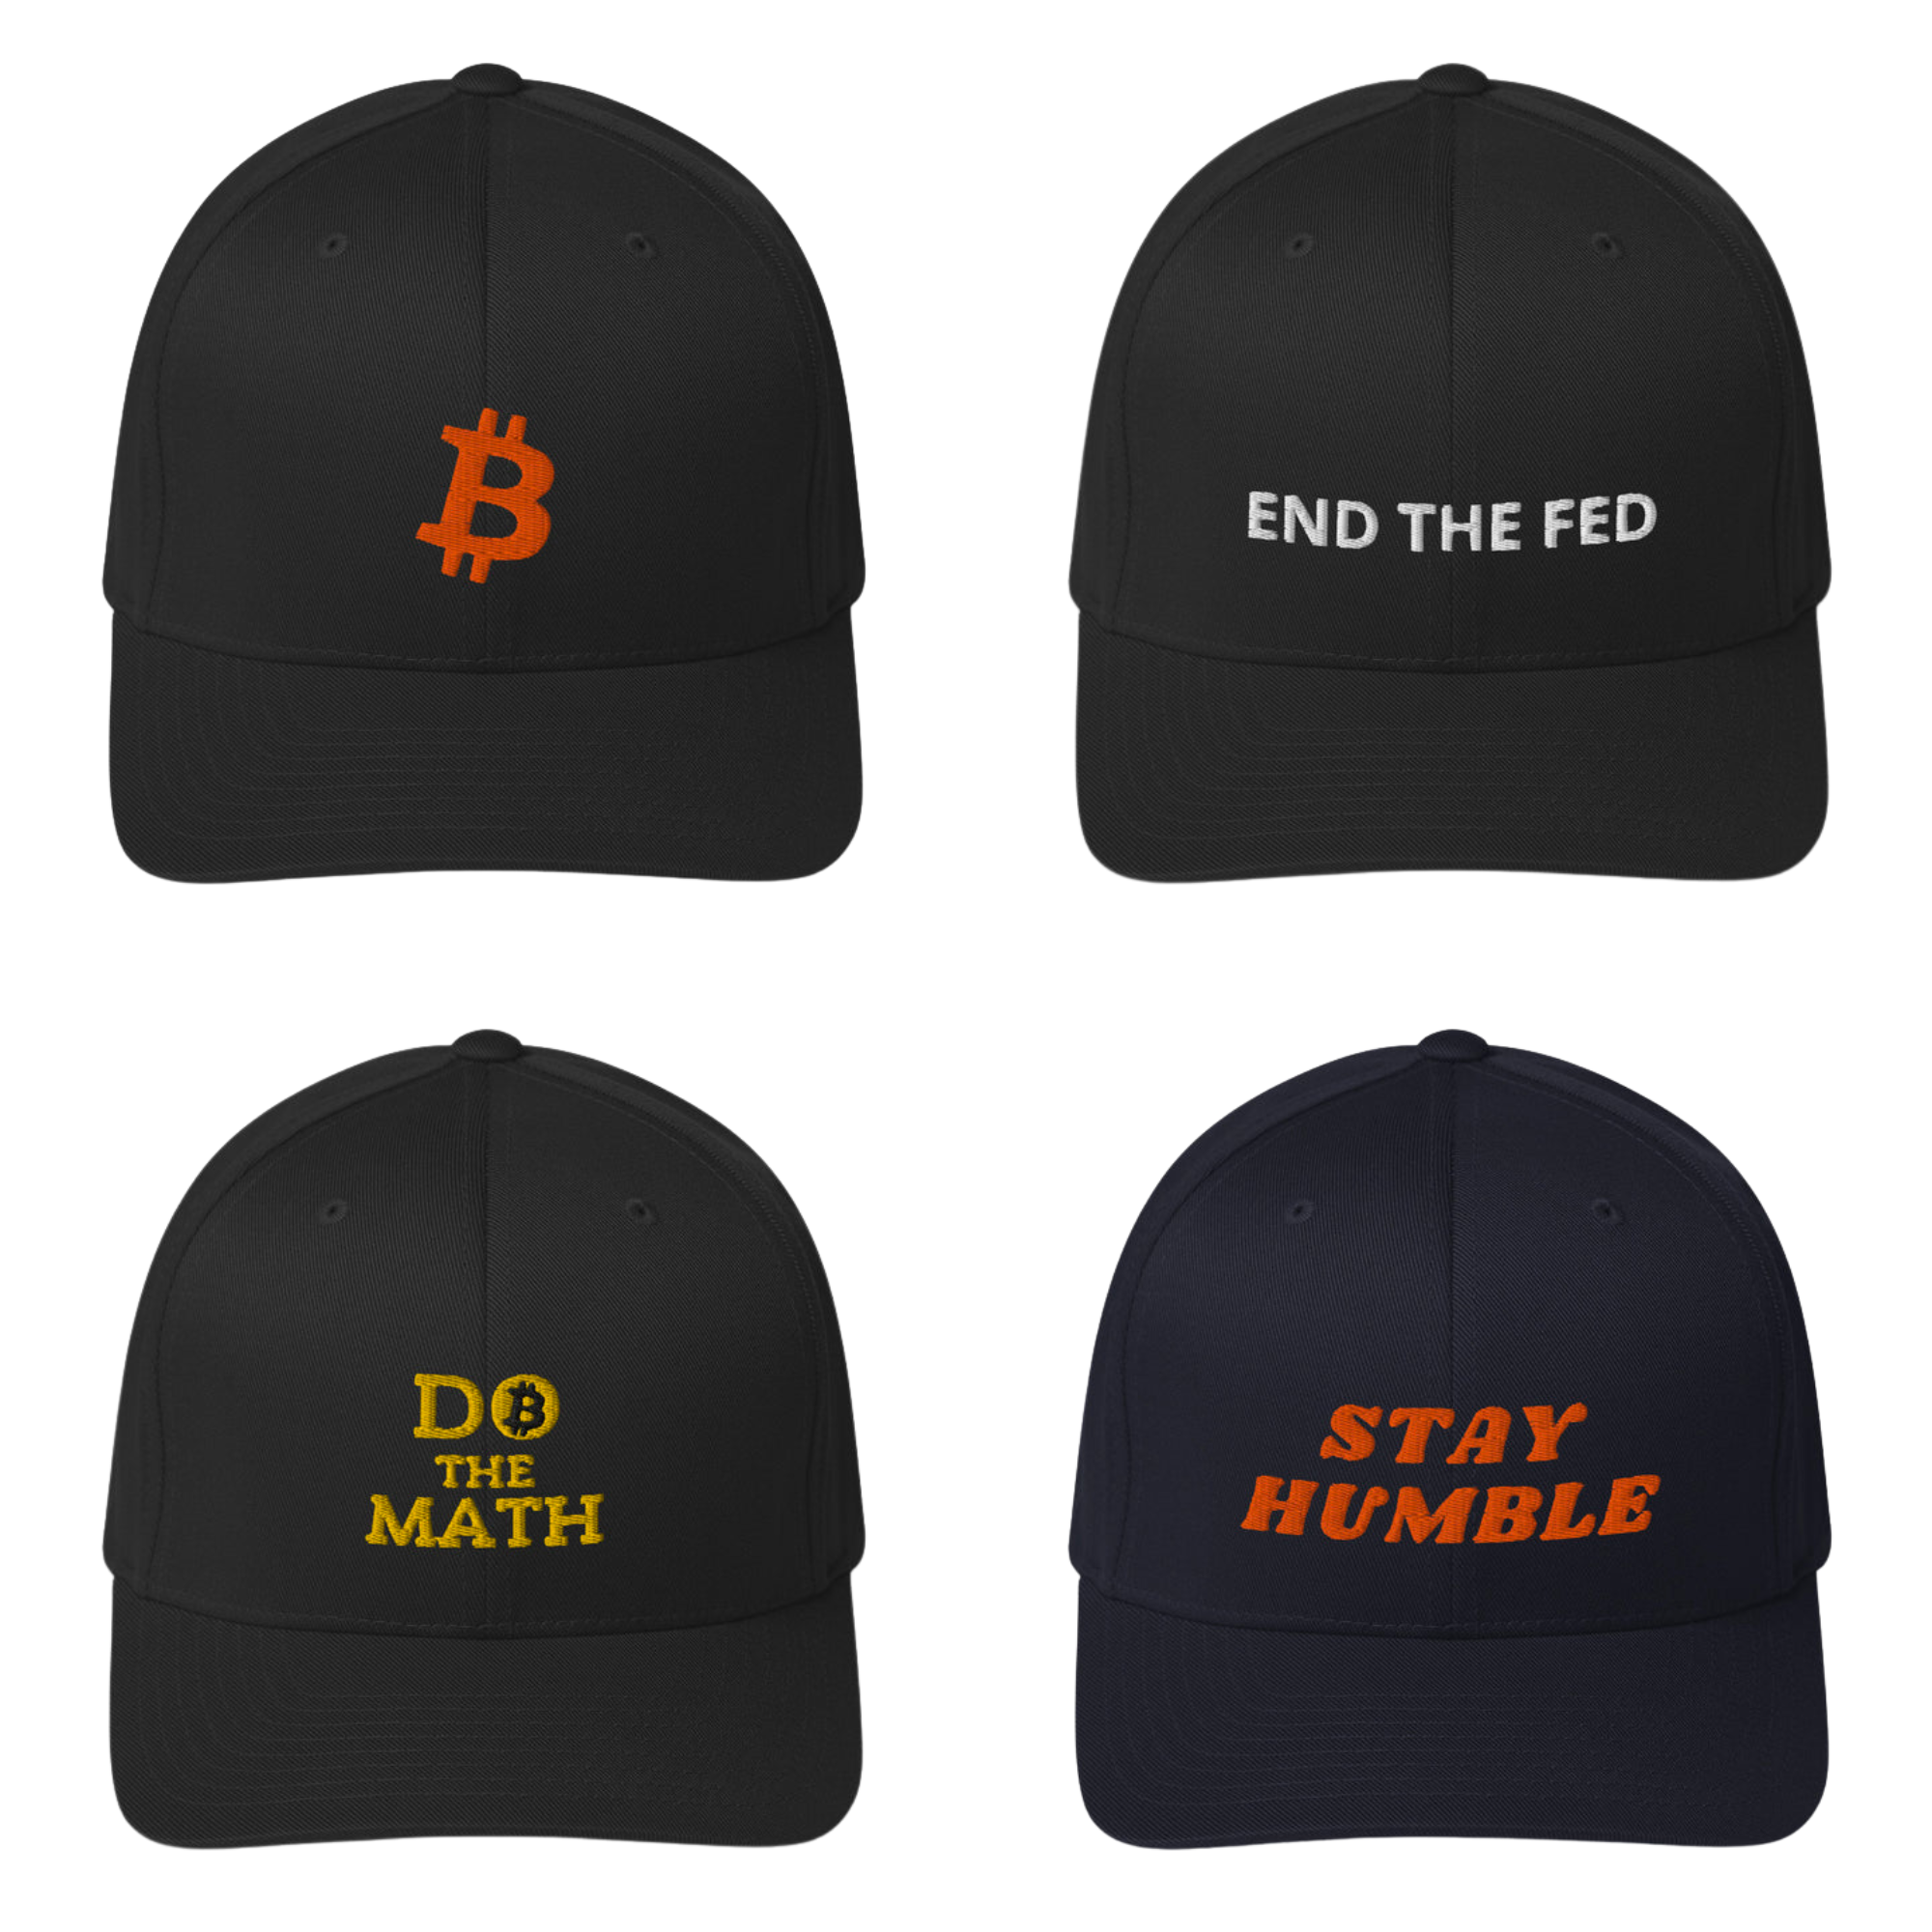 New Flexfit Hat Collection Now Available at FOMO21: Elevate Your Style with Comfort and Durability